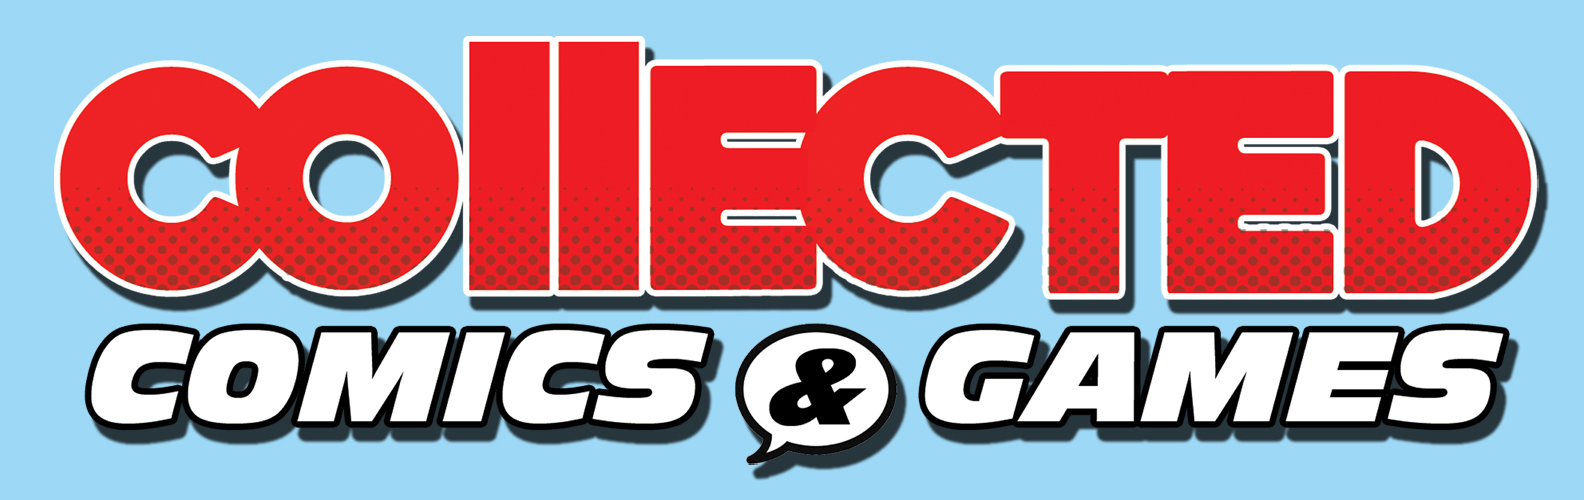 Collected Comics & Games